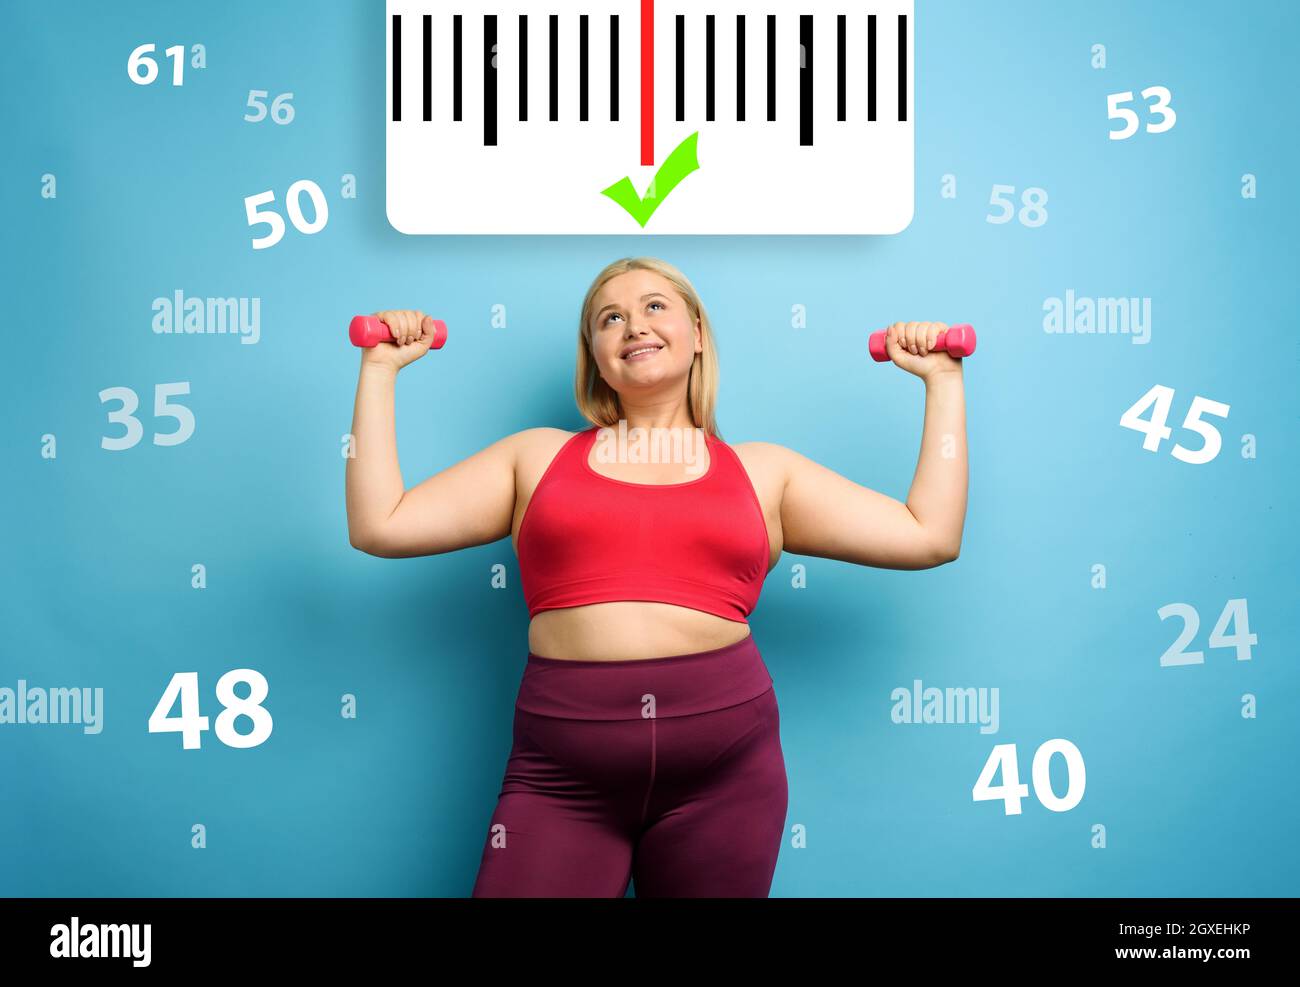 Fat girl does gym at home. satisfied expression. Cyan background Stock  Photo - Alamy